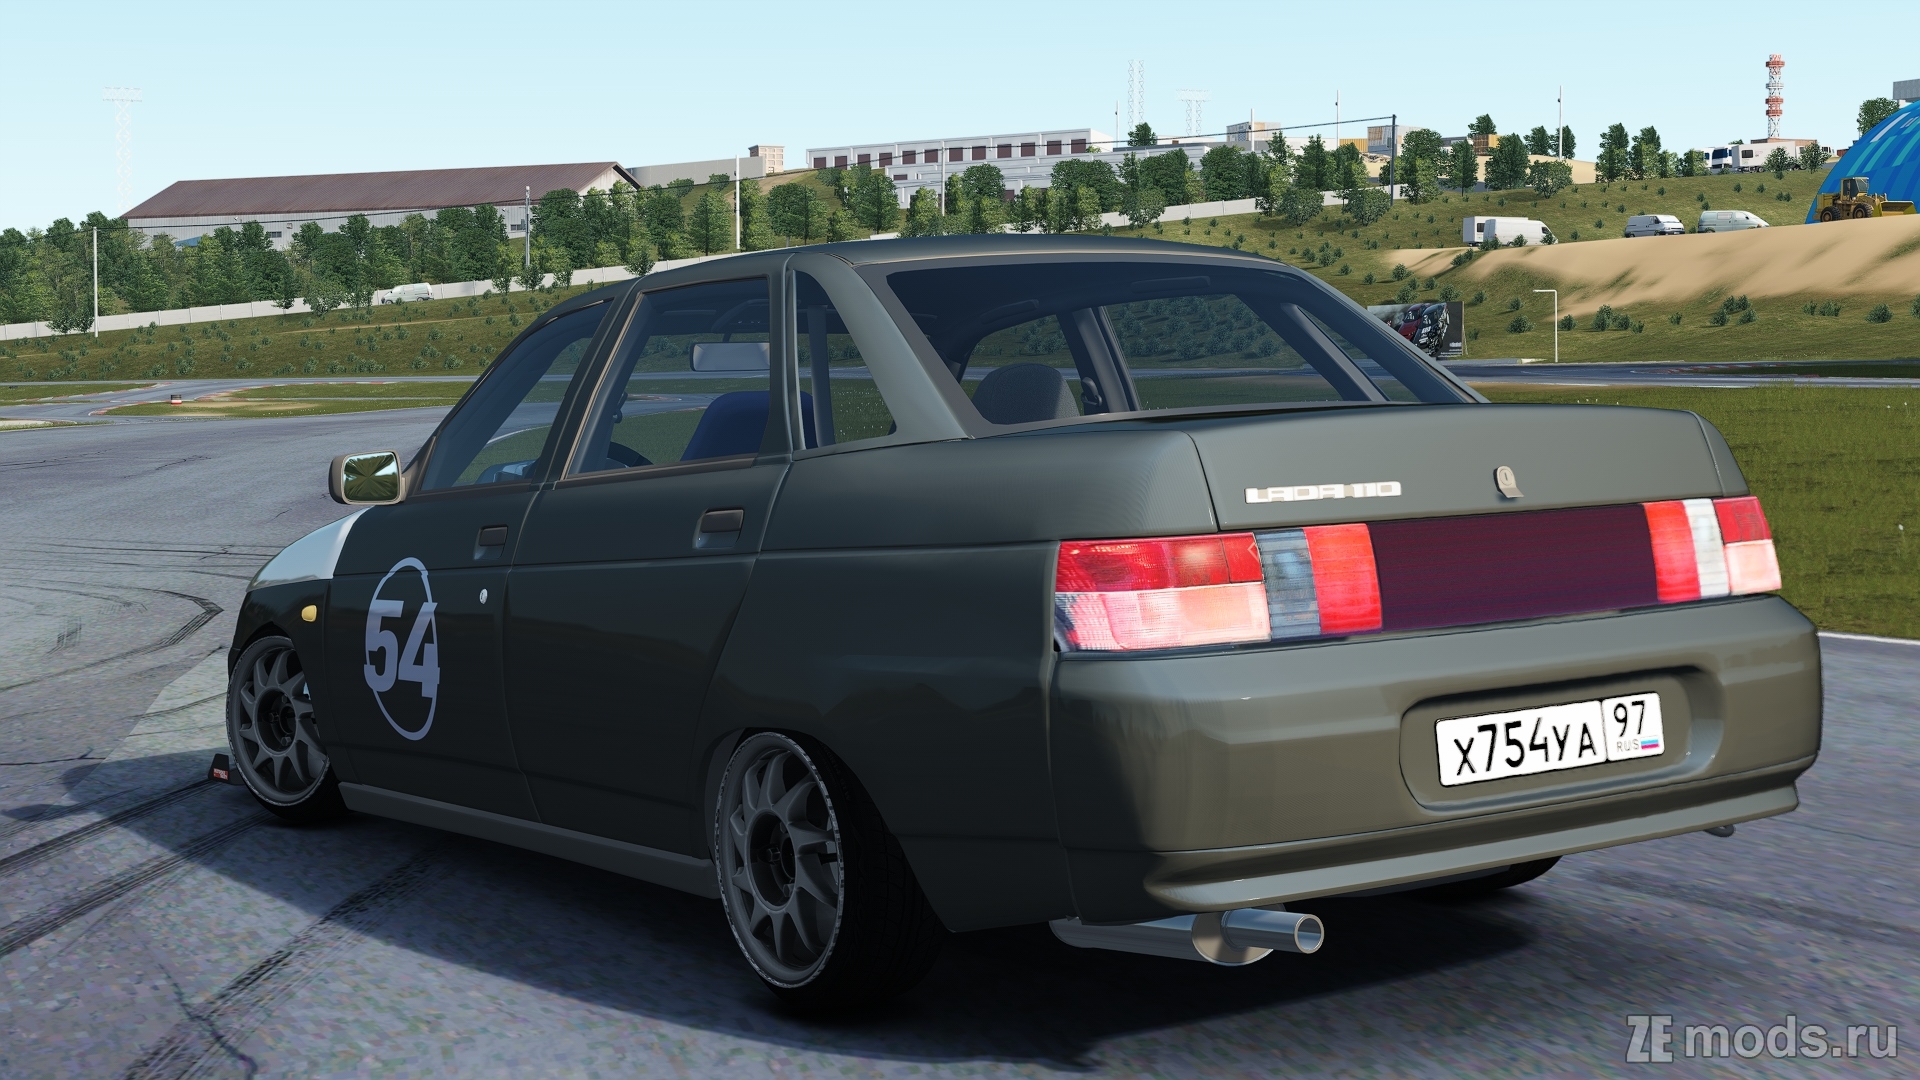 Мод Lada 2110 @trueillegal (ROSTOVSKIE TAXISTY) для Assetto Corsa